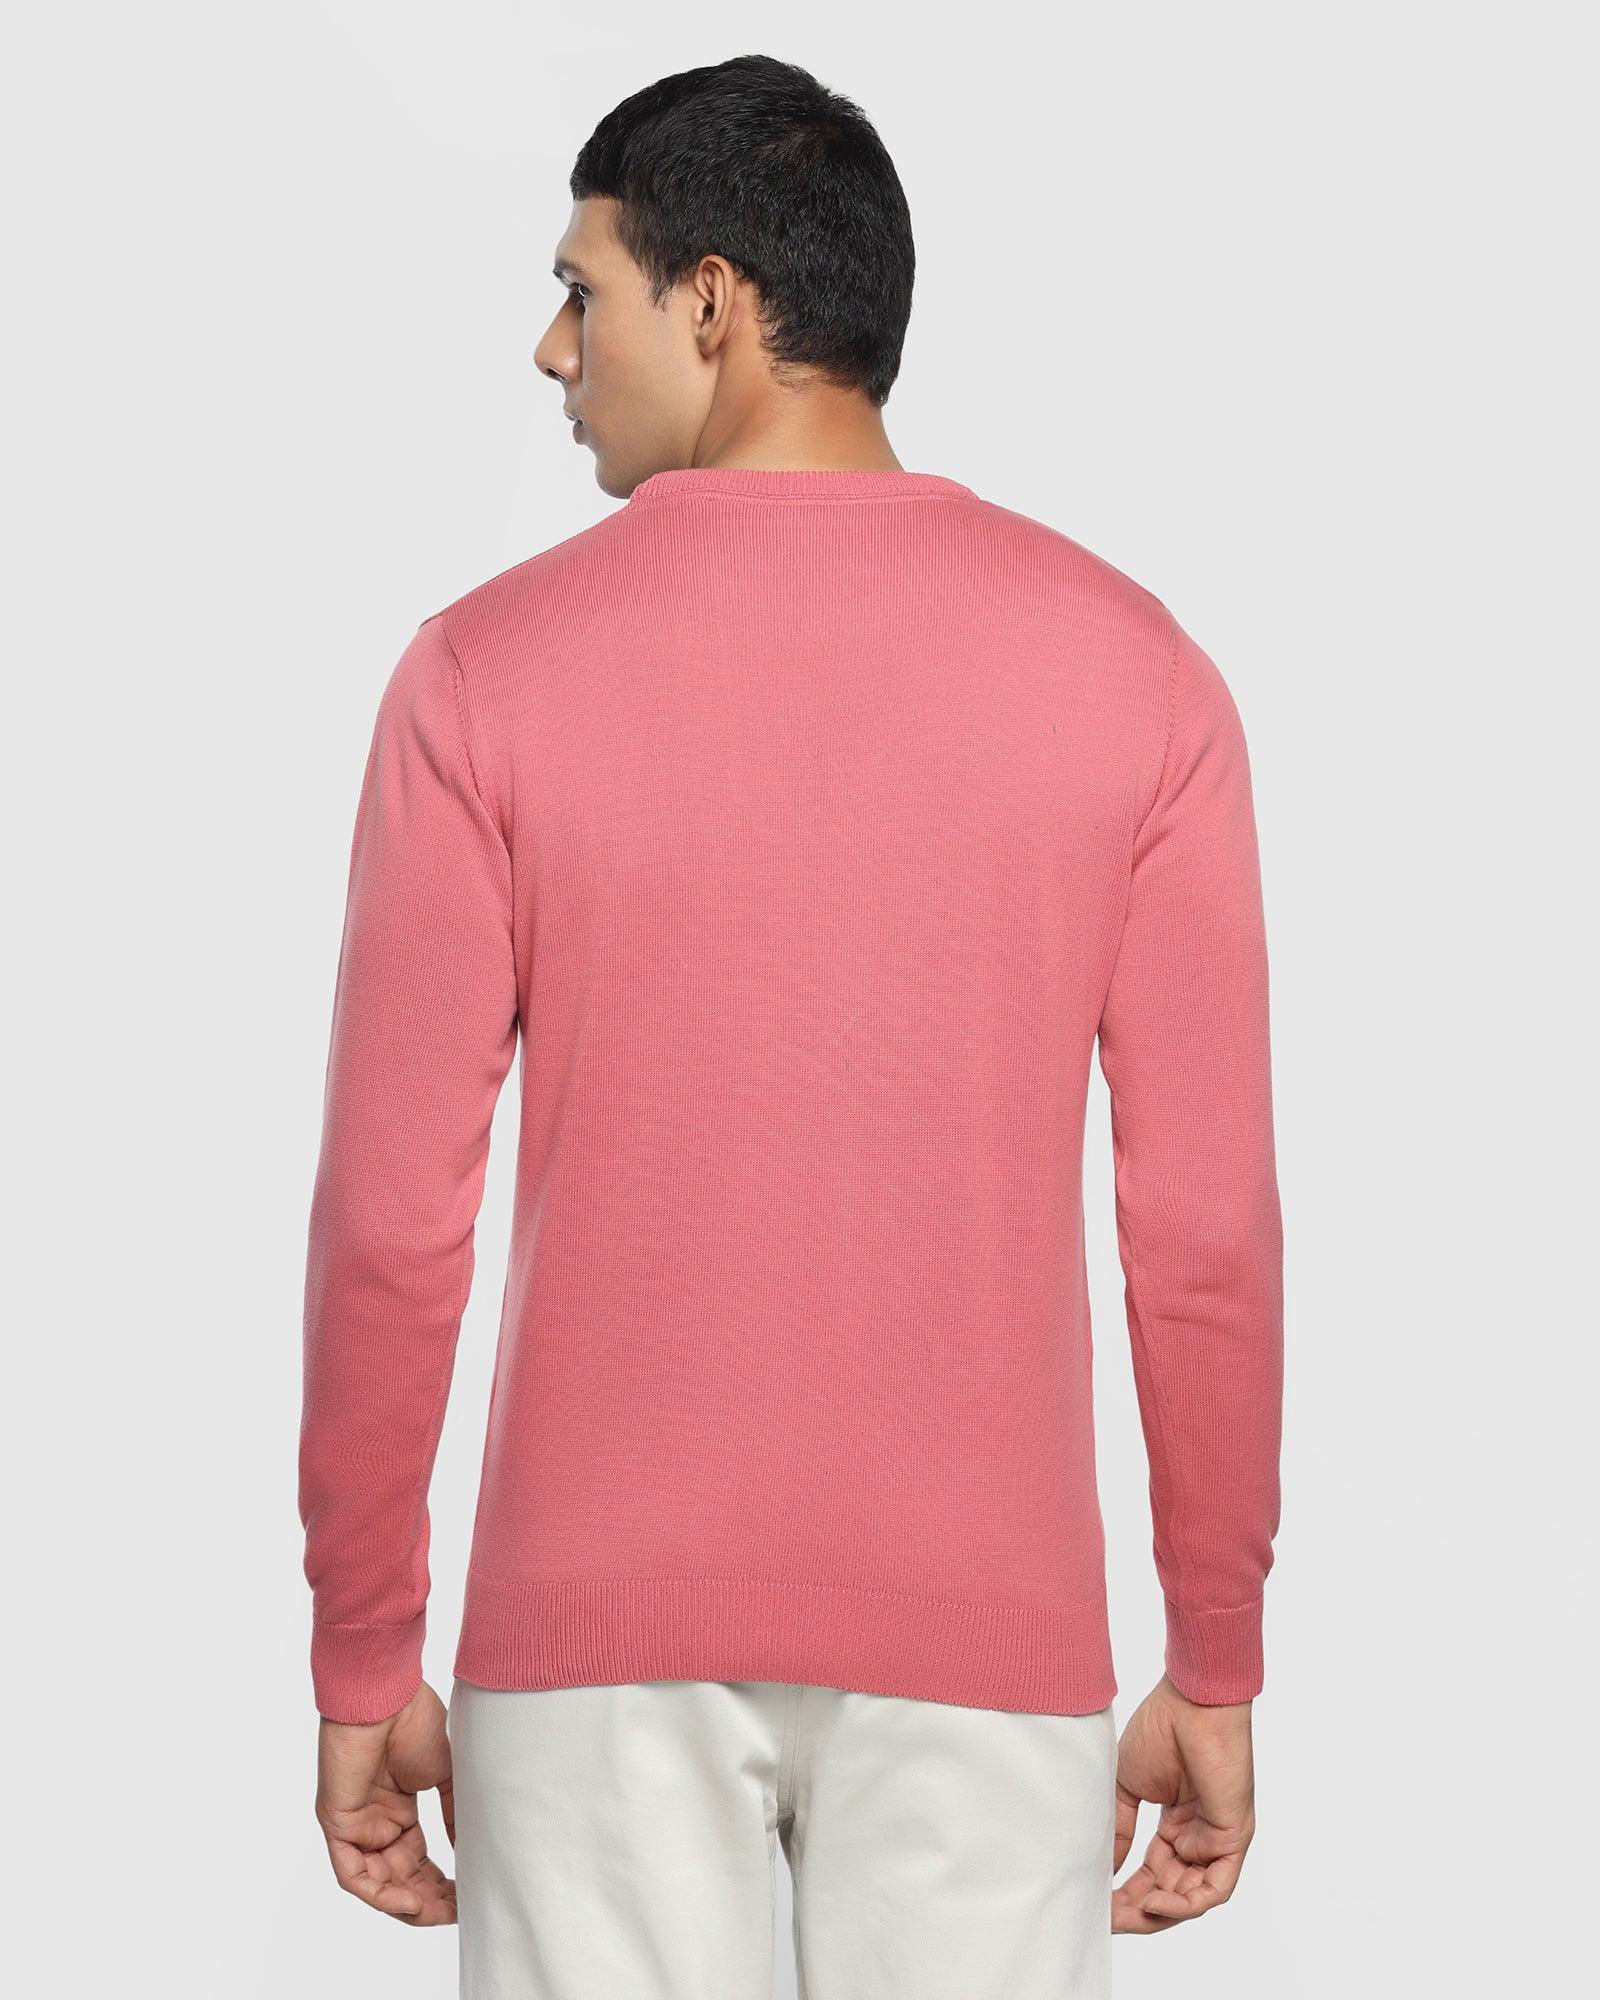 Crew Neck Dusty Pink Solid Sweater - Riddle